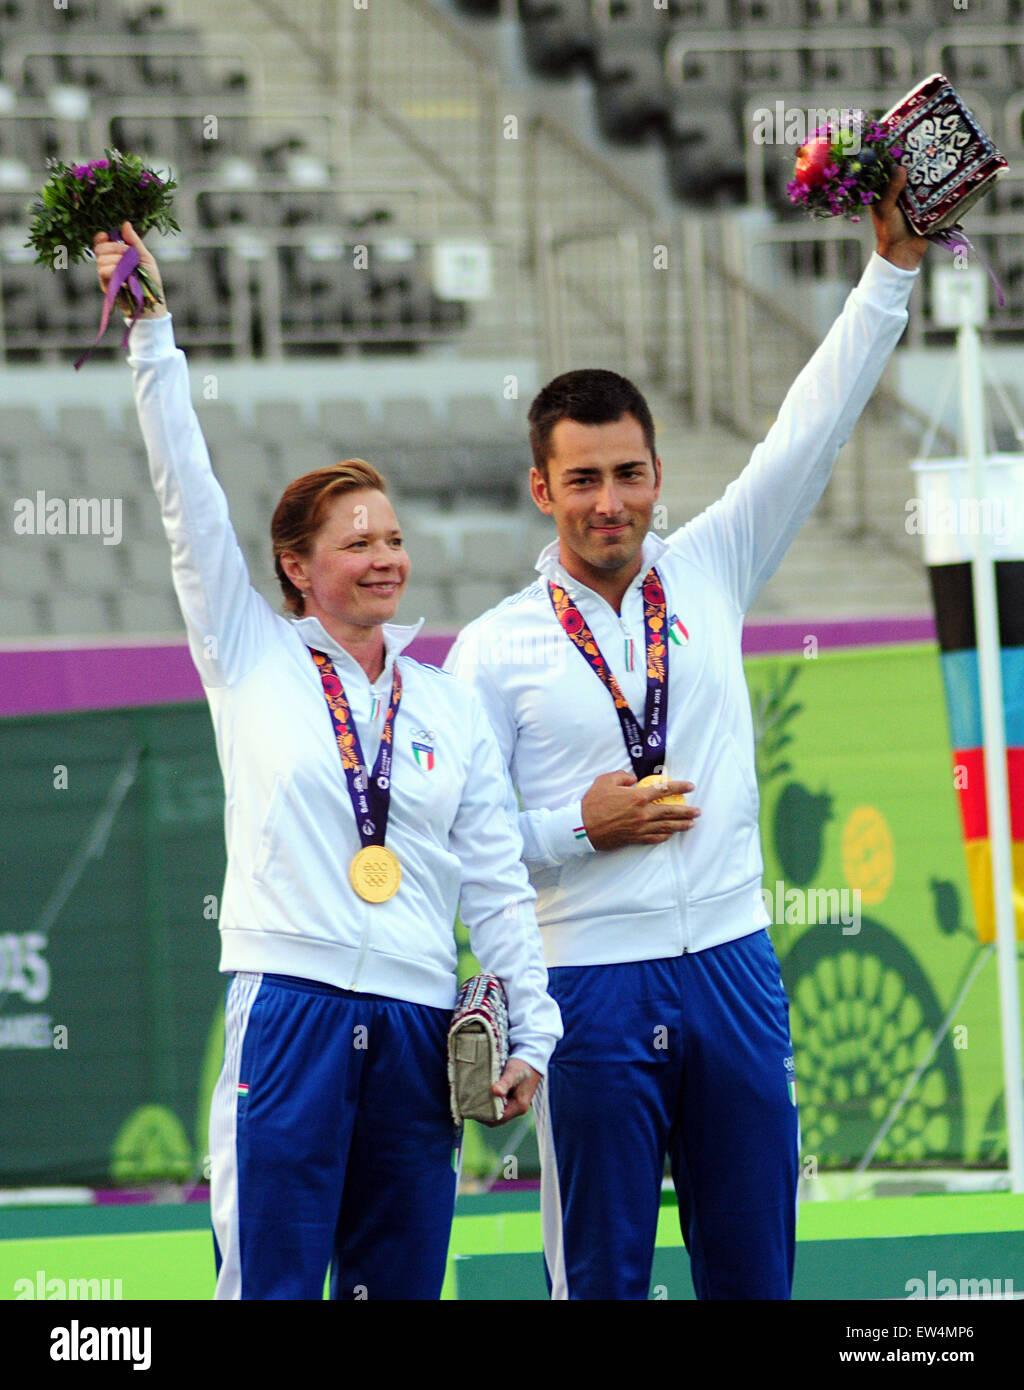 Baku. 17th June, 2015. Members of the Italian team attend the awarding ceremony for the archery mixed at the European Games in Azerbaijan's capital of Baku on June 17, 2015. Italy won the gold medal of the team event. © Tofik Babayev/Xinhua/Alamy Live News Stock Photo